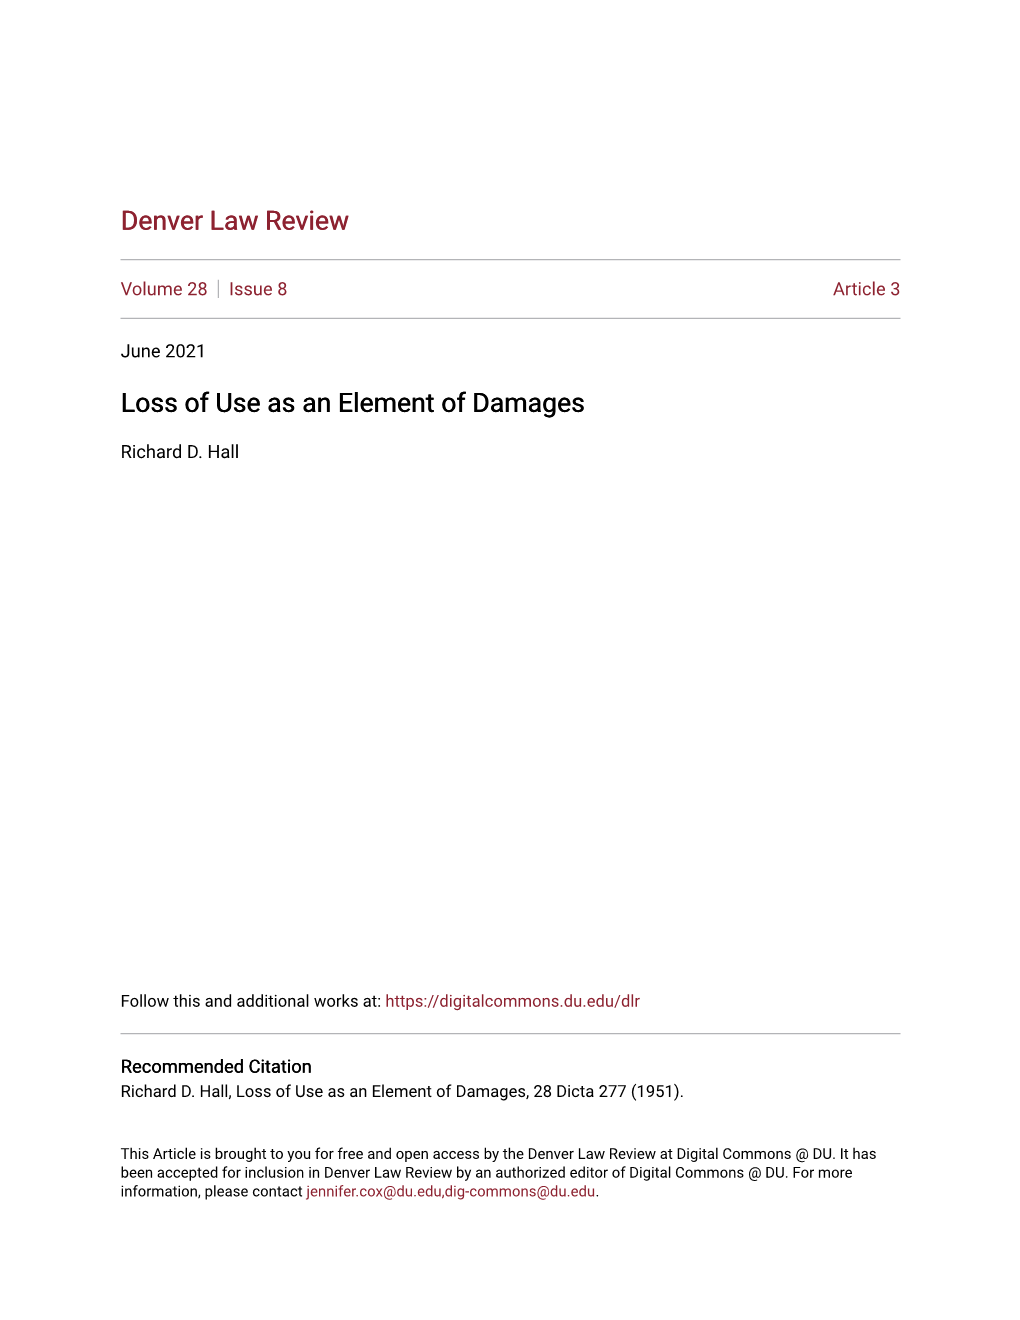 Loss of Use As an Element of Damages